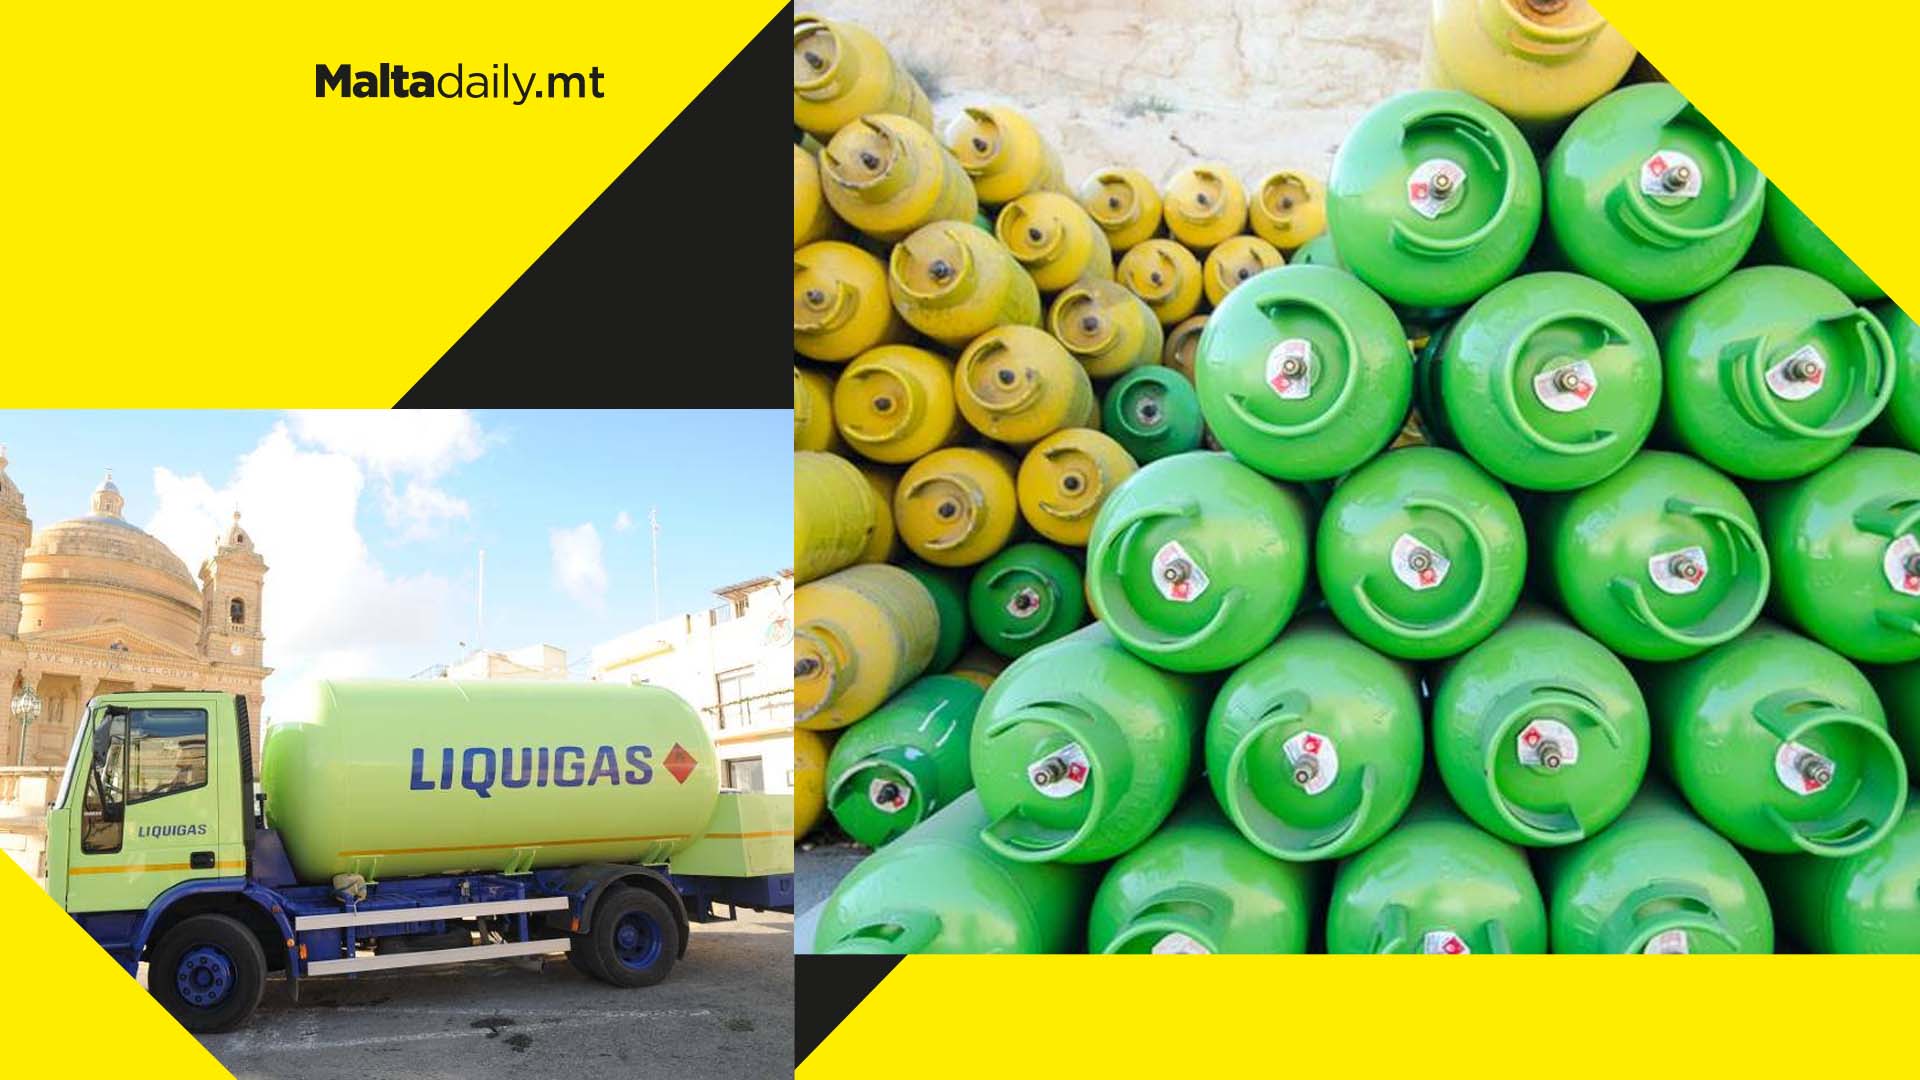 Liquigas claims it has enough gas supply to meet future demands